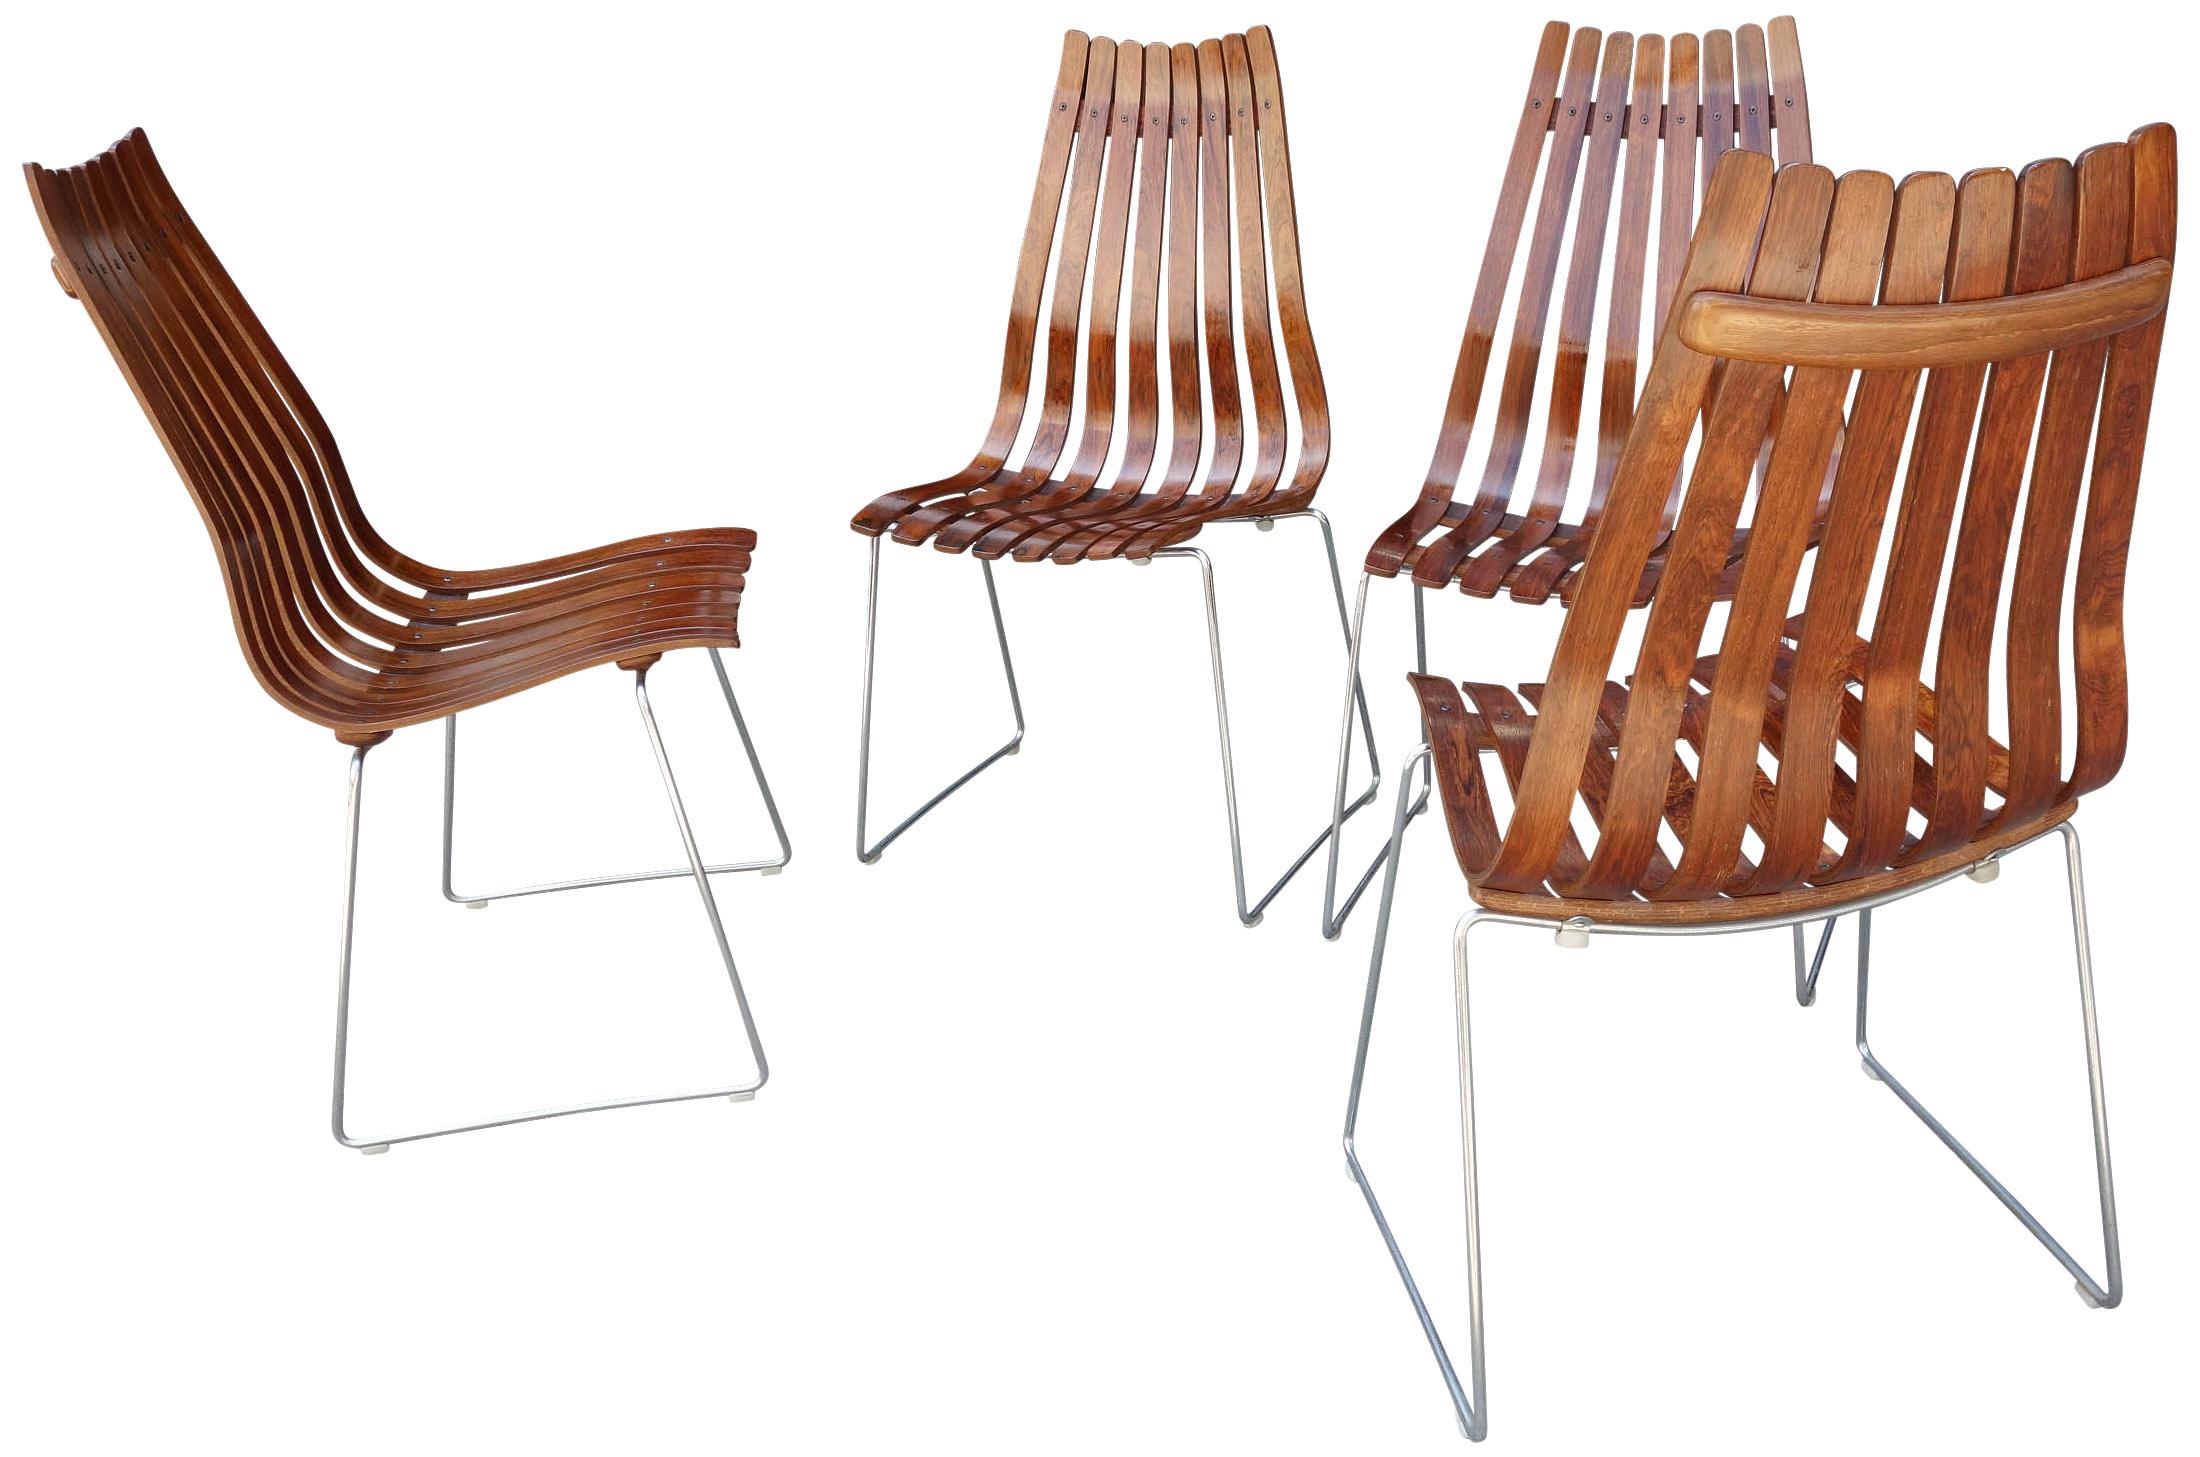 Midcentury Scandia Chairs by Hans Brattrud for Hove Mobler 2